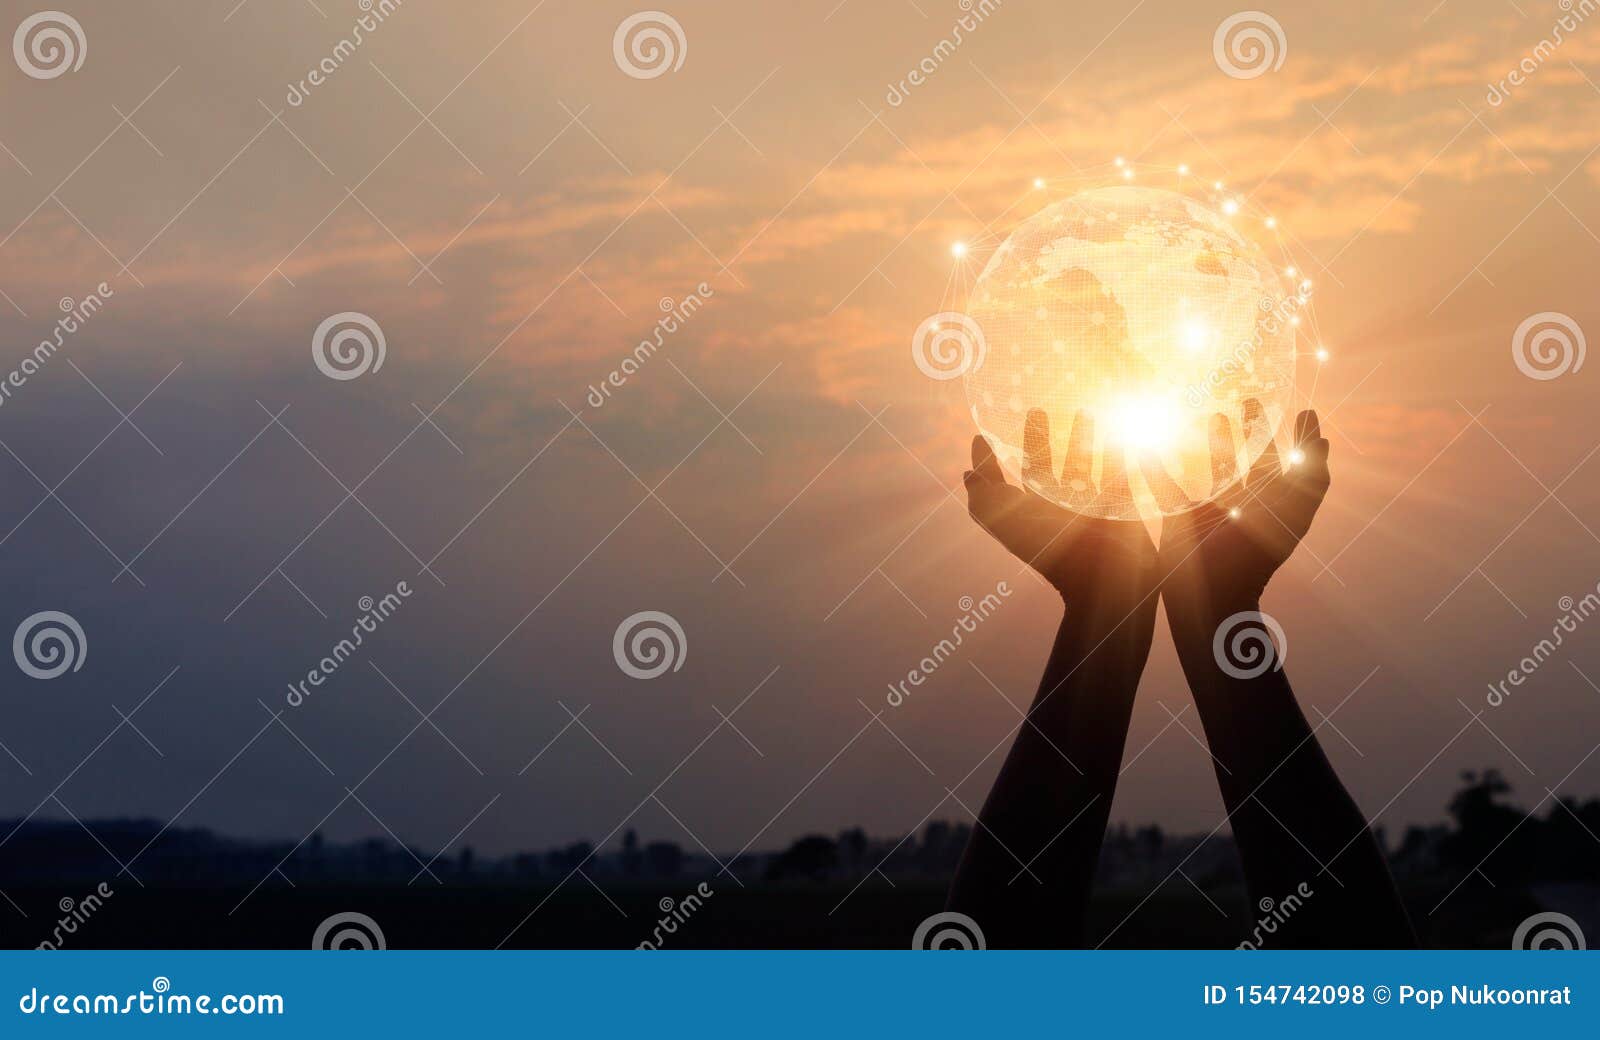 abstract networking. technology and communication. hands holding global network and data exchanges on sunset background